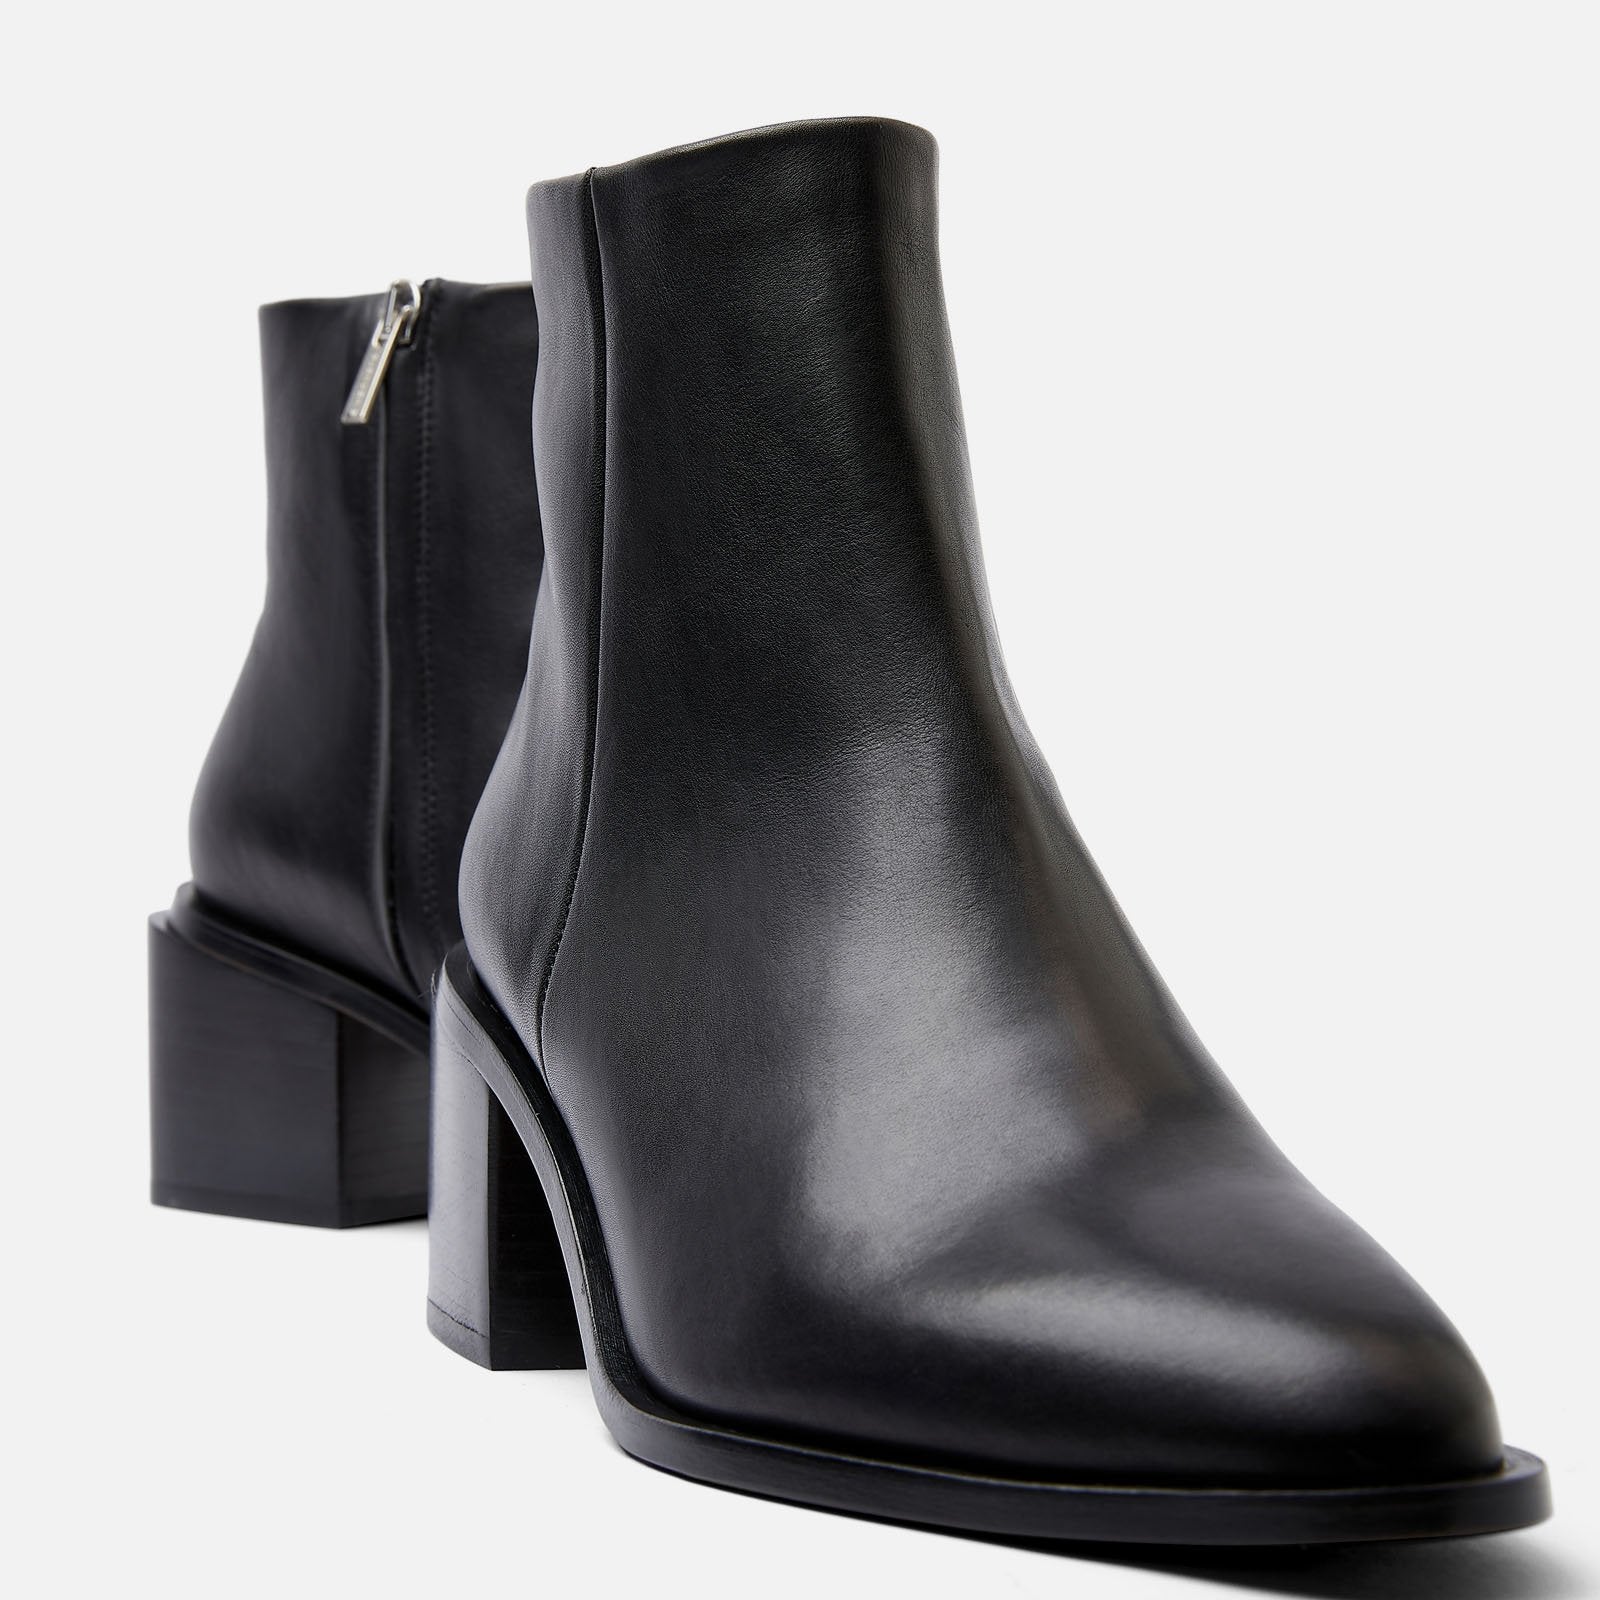 ANKLE BOOTS - XENIA ankle boots, black || OUTLET - XENIABLKCALM350 - Clergerie Paris - USA